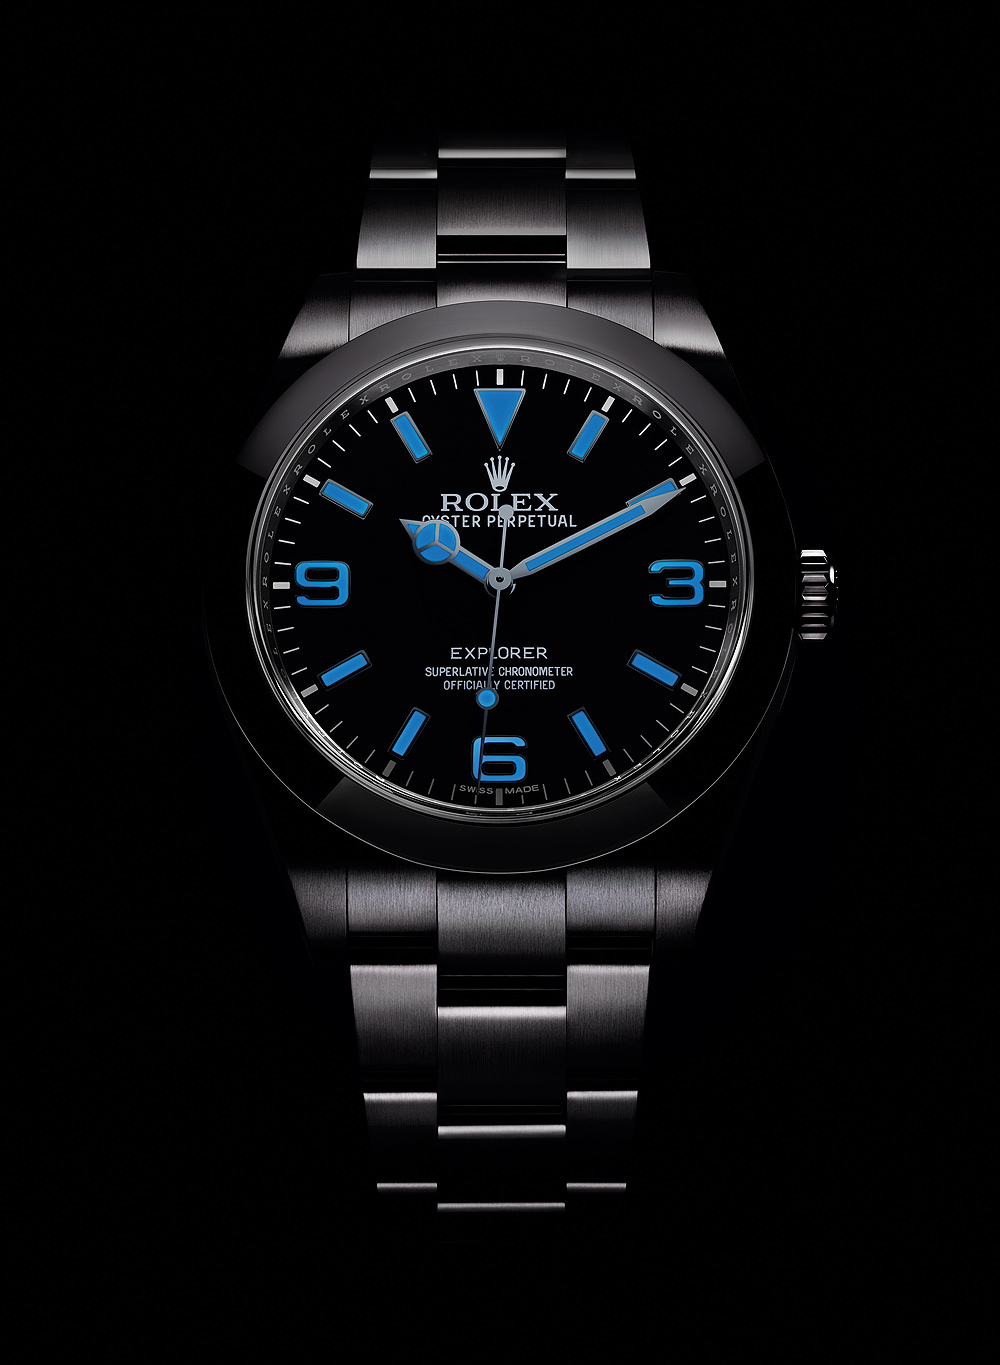 Rolex Oyster Perpetual Explorer - front - lume